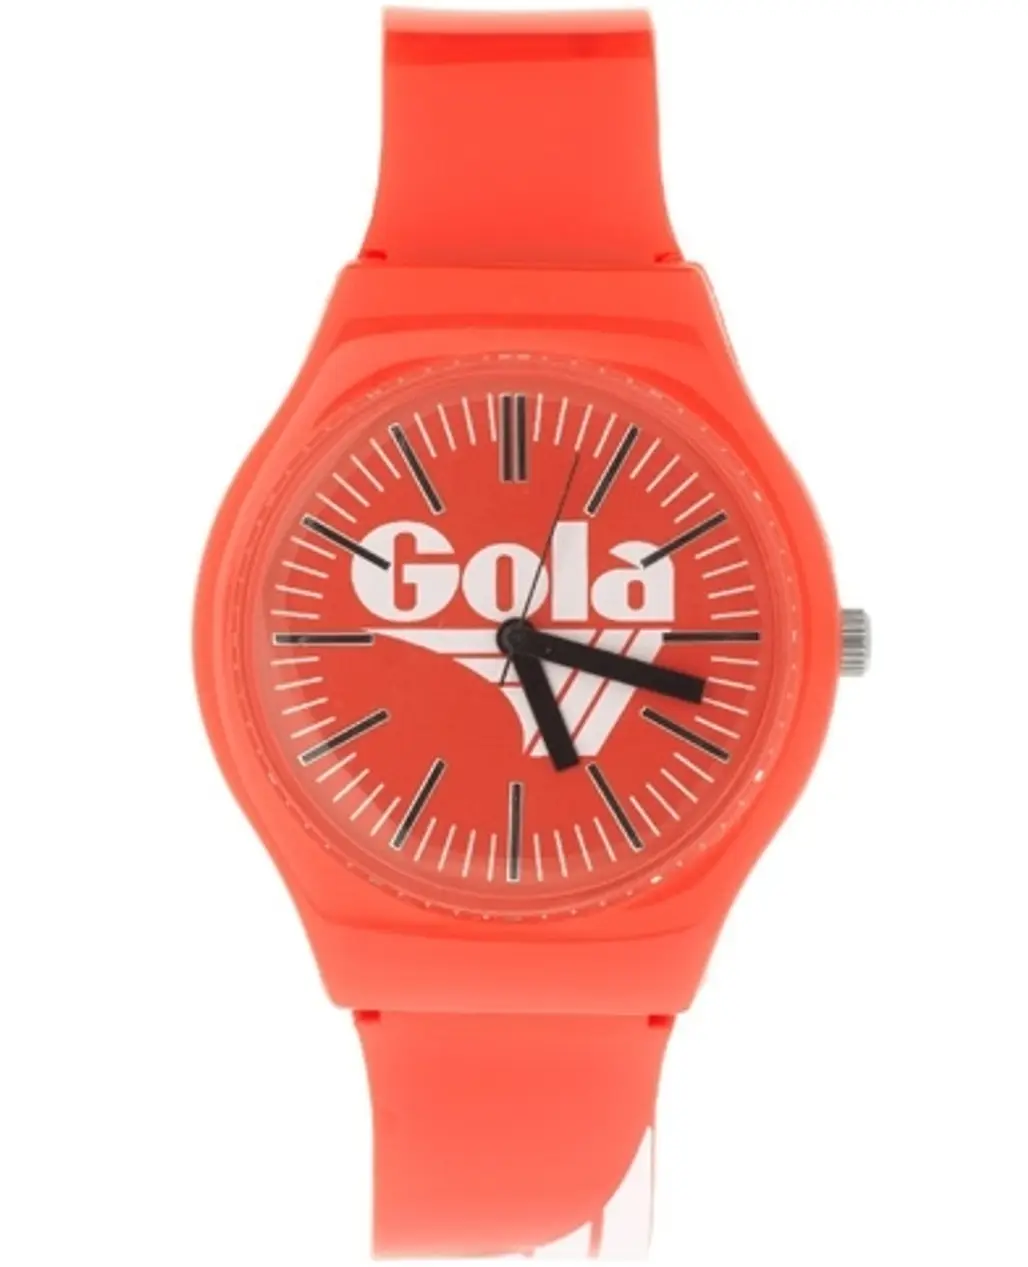 Gola Classic Red and White Strap Watch